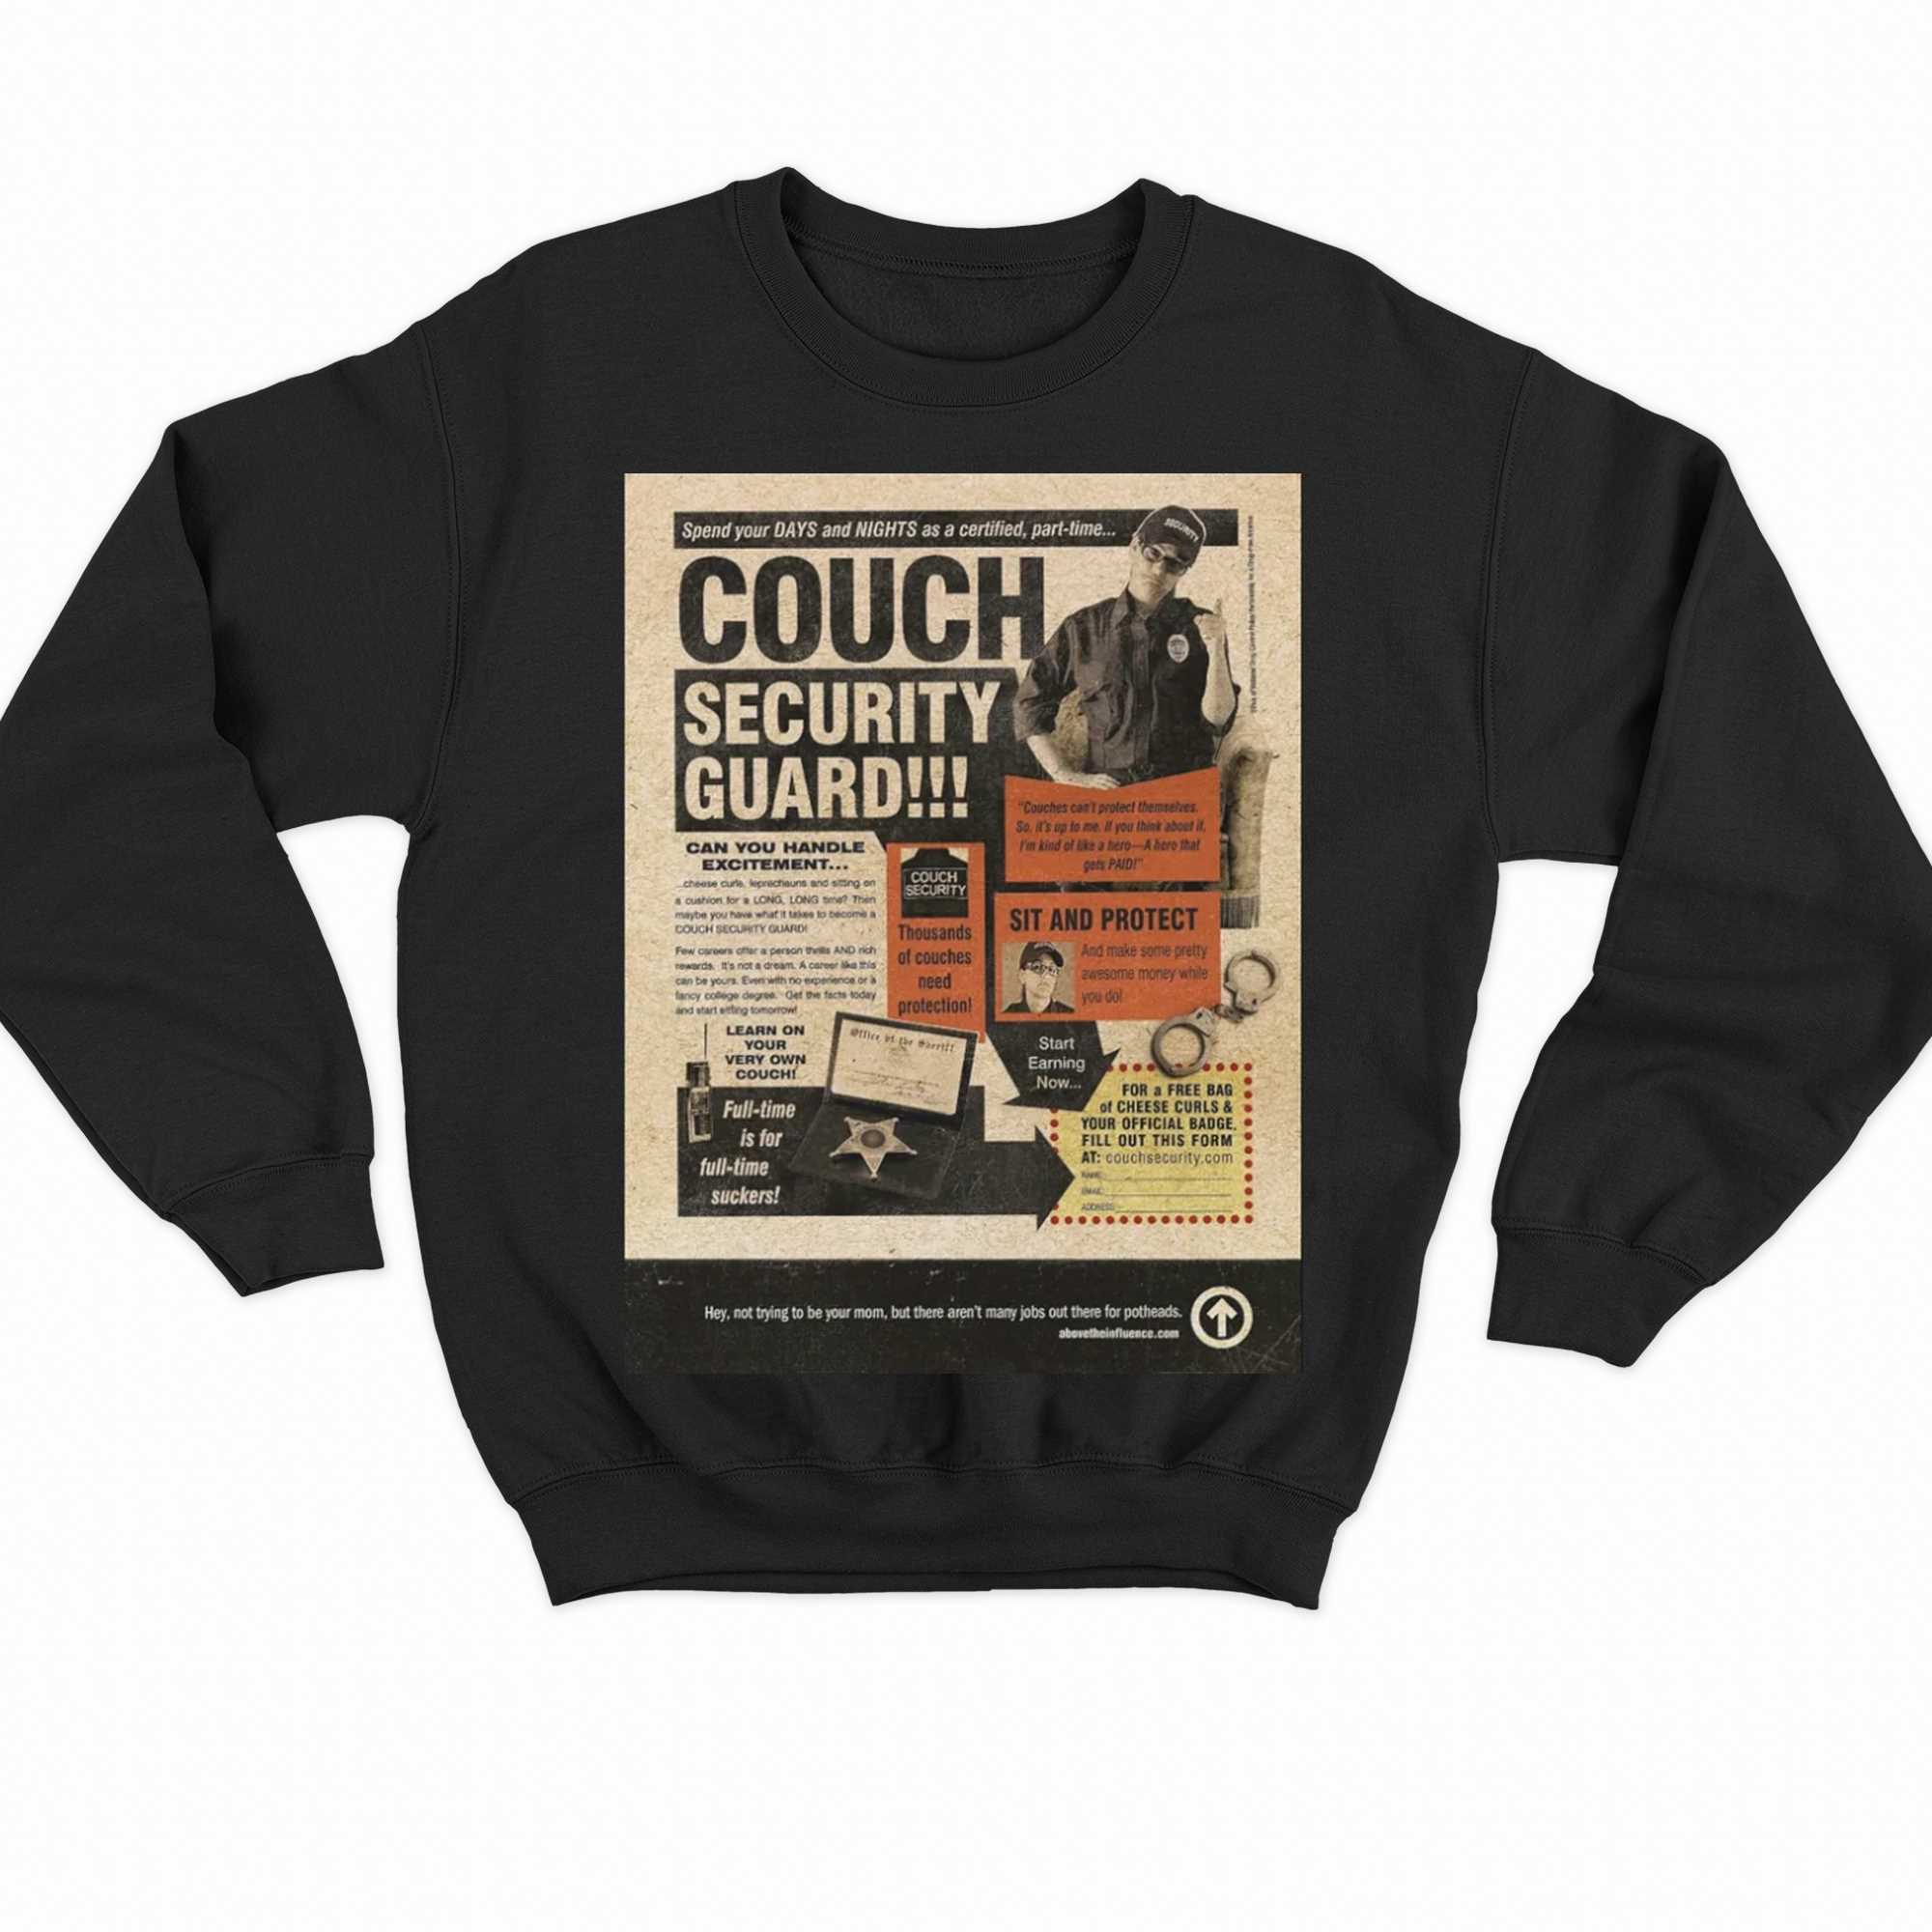 Couch Security Guard T-shirt 